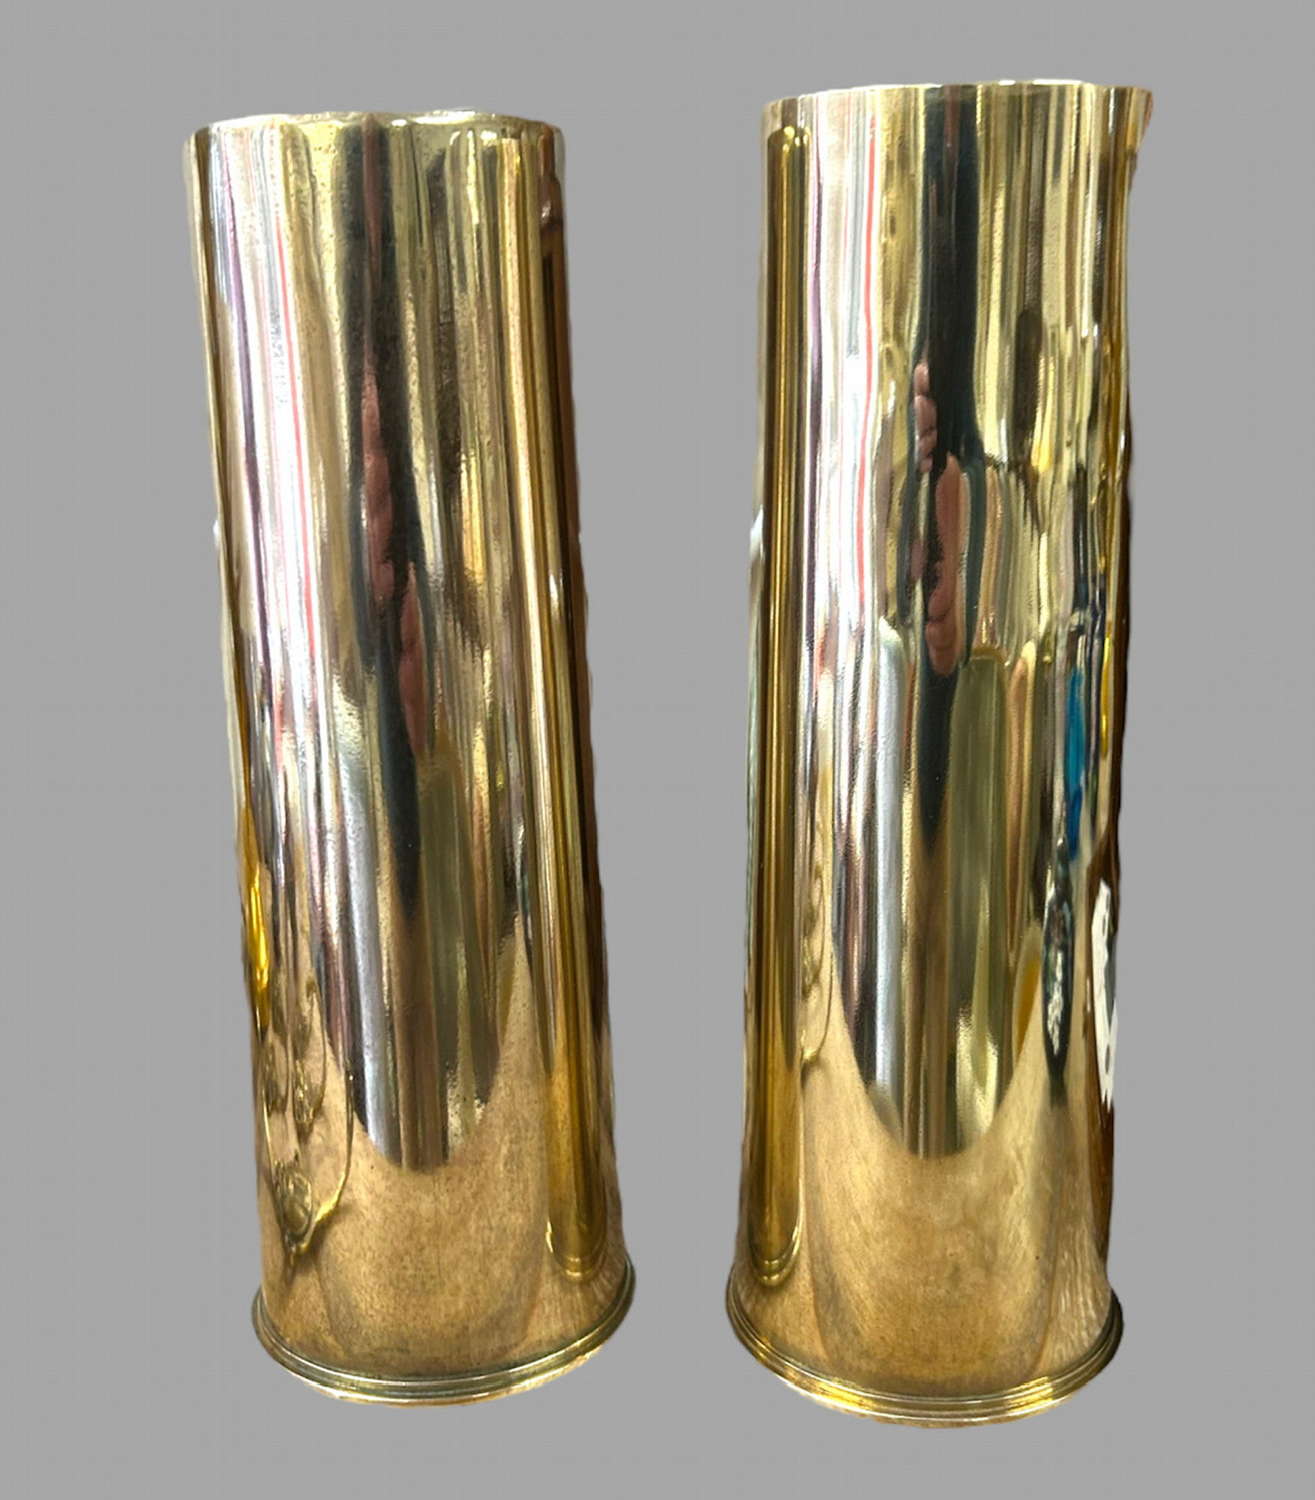 A Pair of Mk11 18 Pounder Brass Cartridge Cases 1918